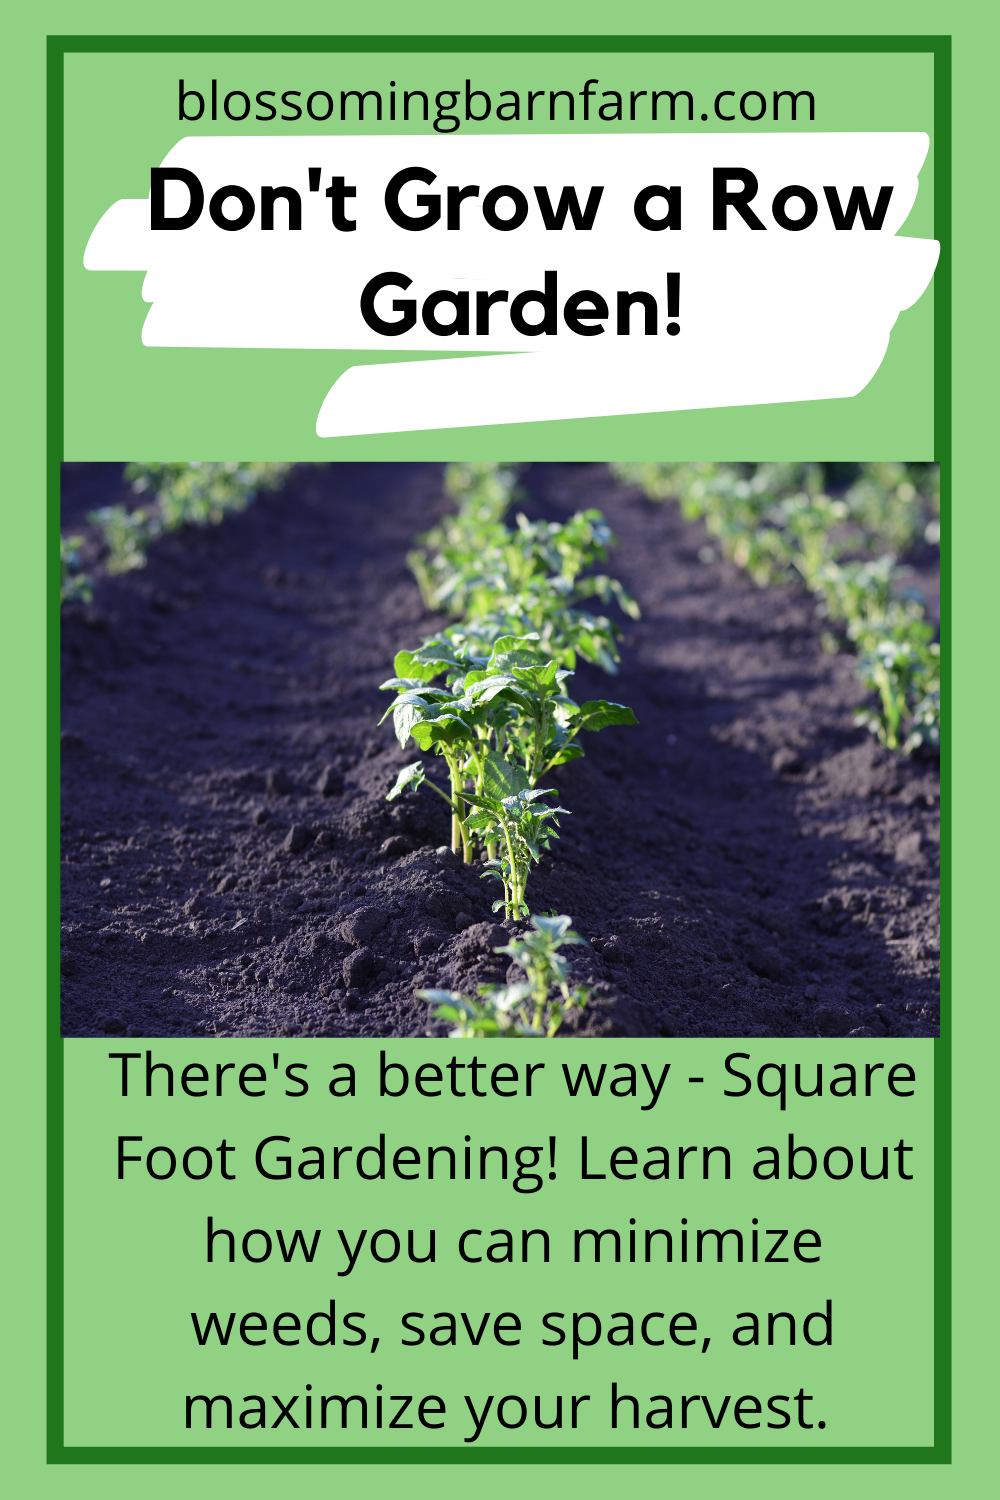 Don't Grow A Row Garden - the best gardening method is square foot gardening. Text on green background with row of young green plants in the center